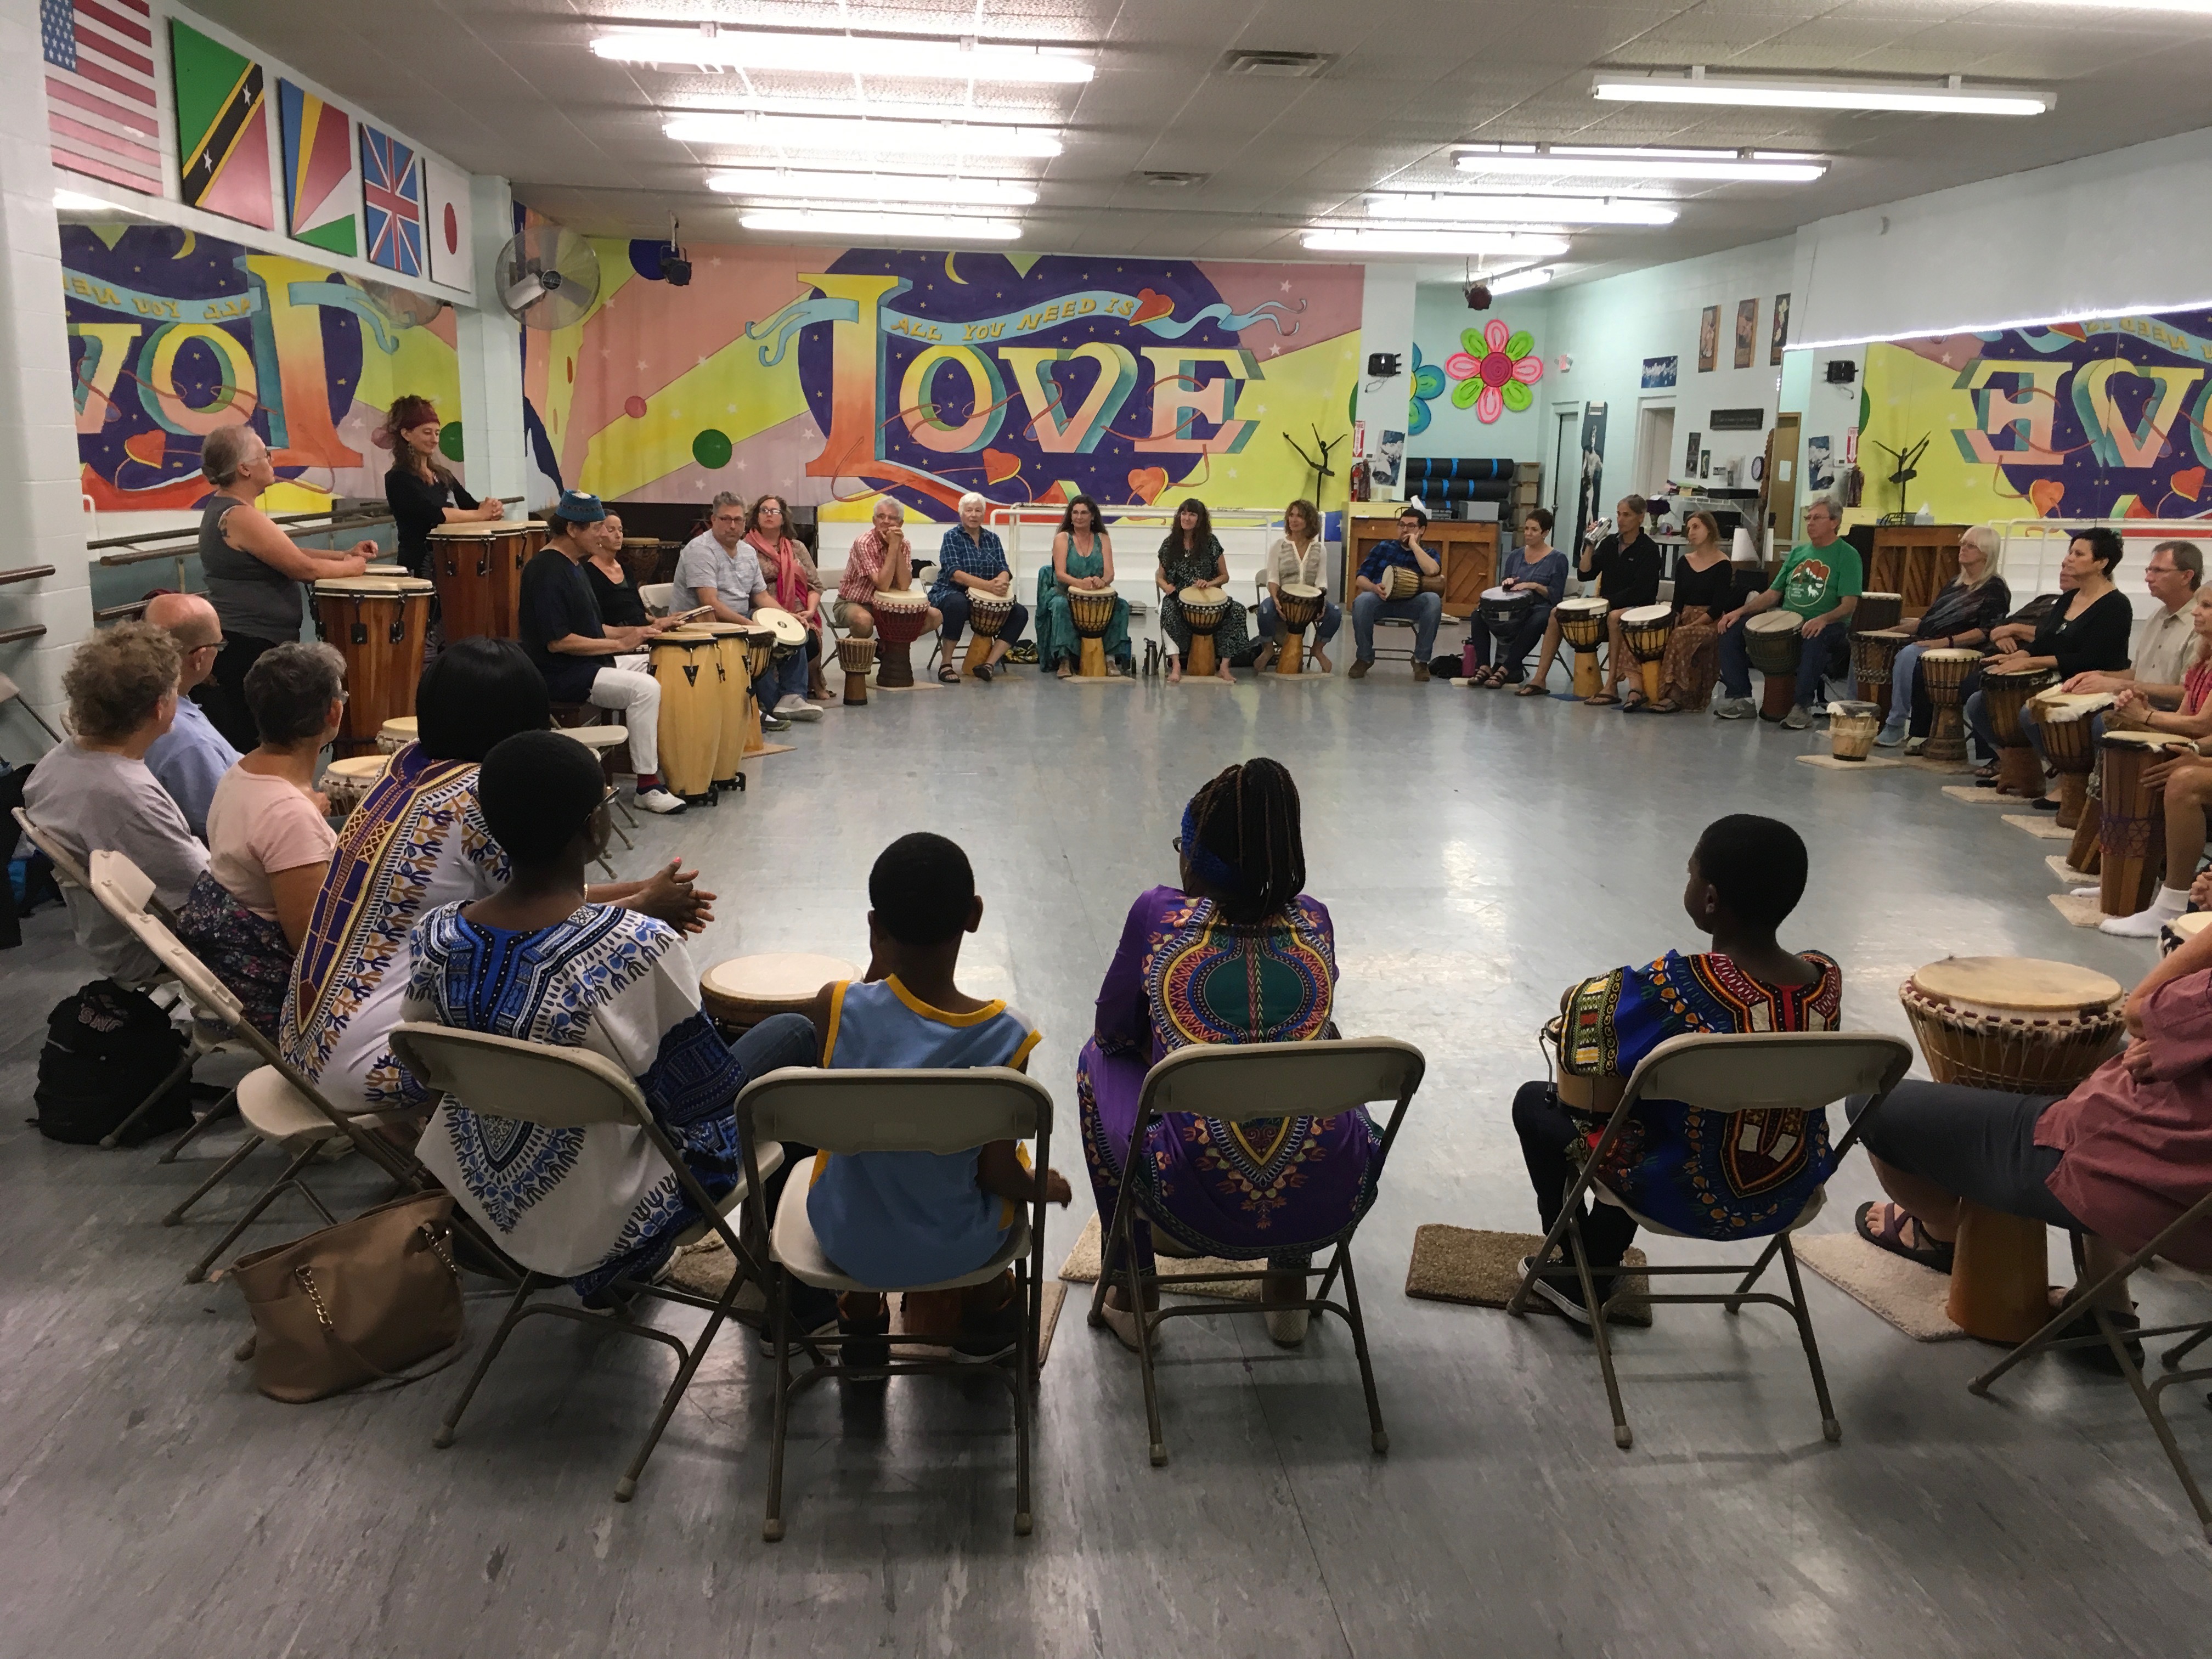 African Drumming and Dance Workshop